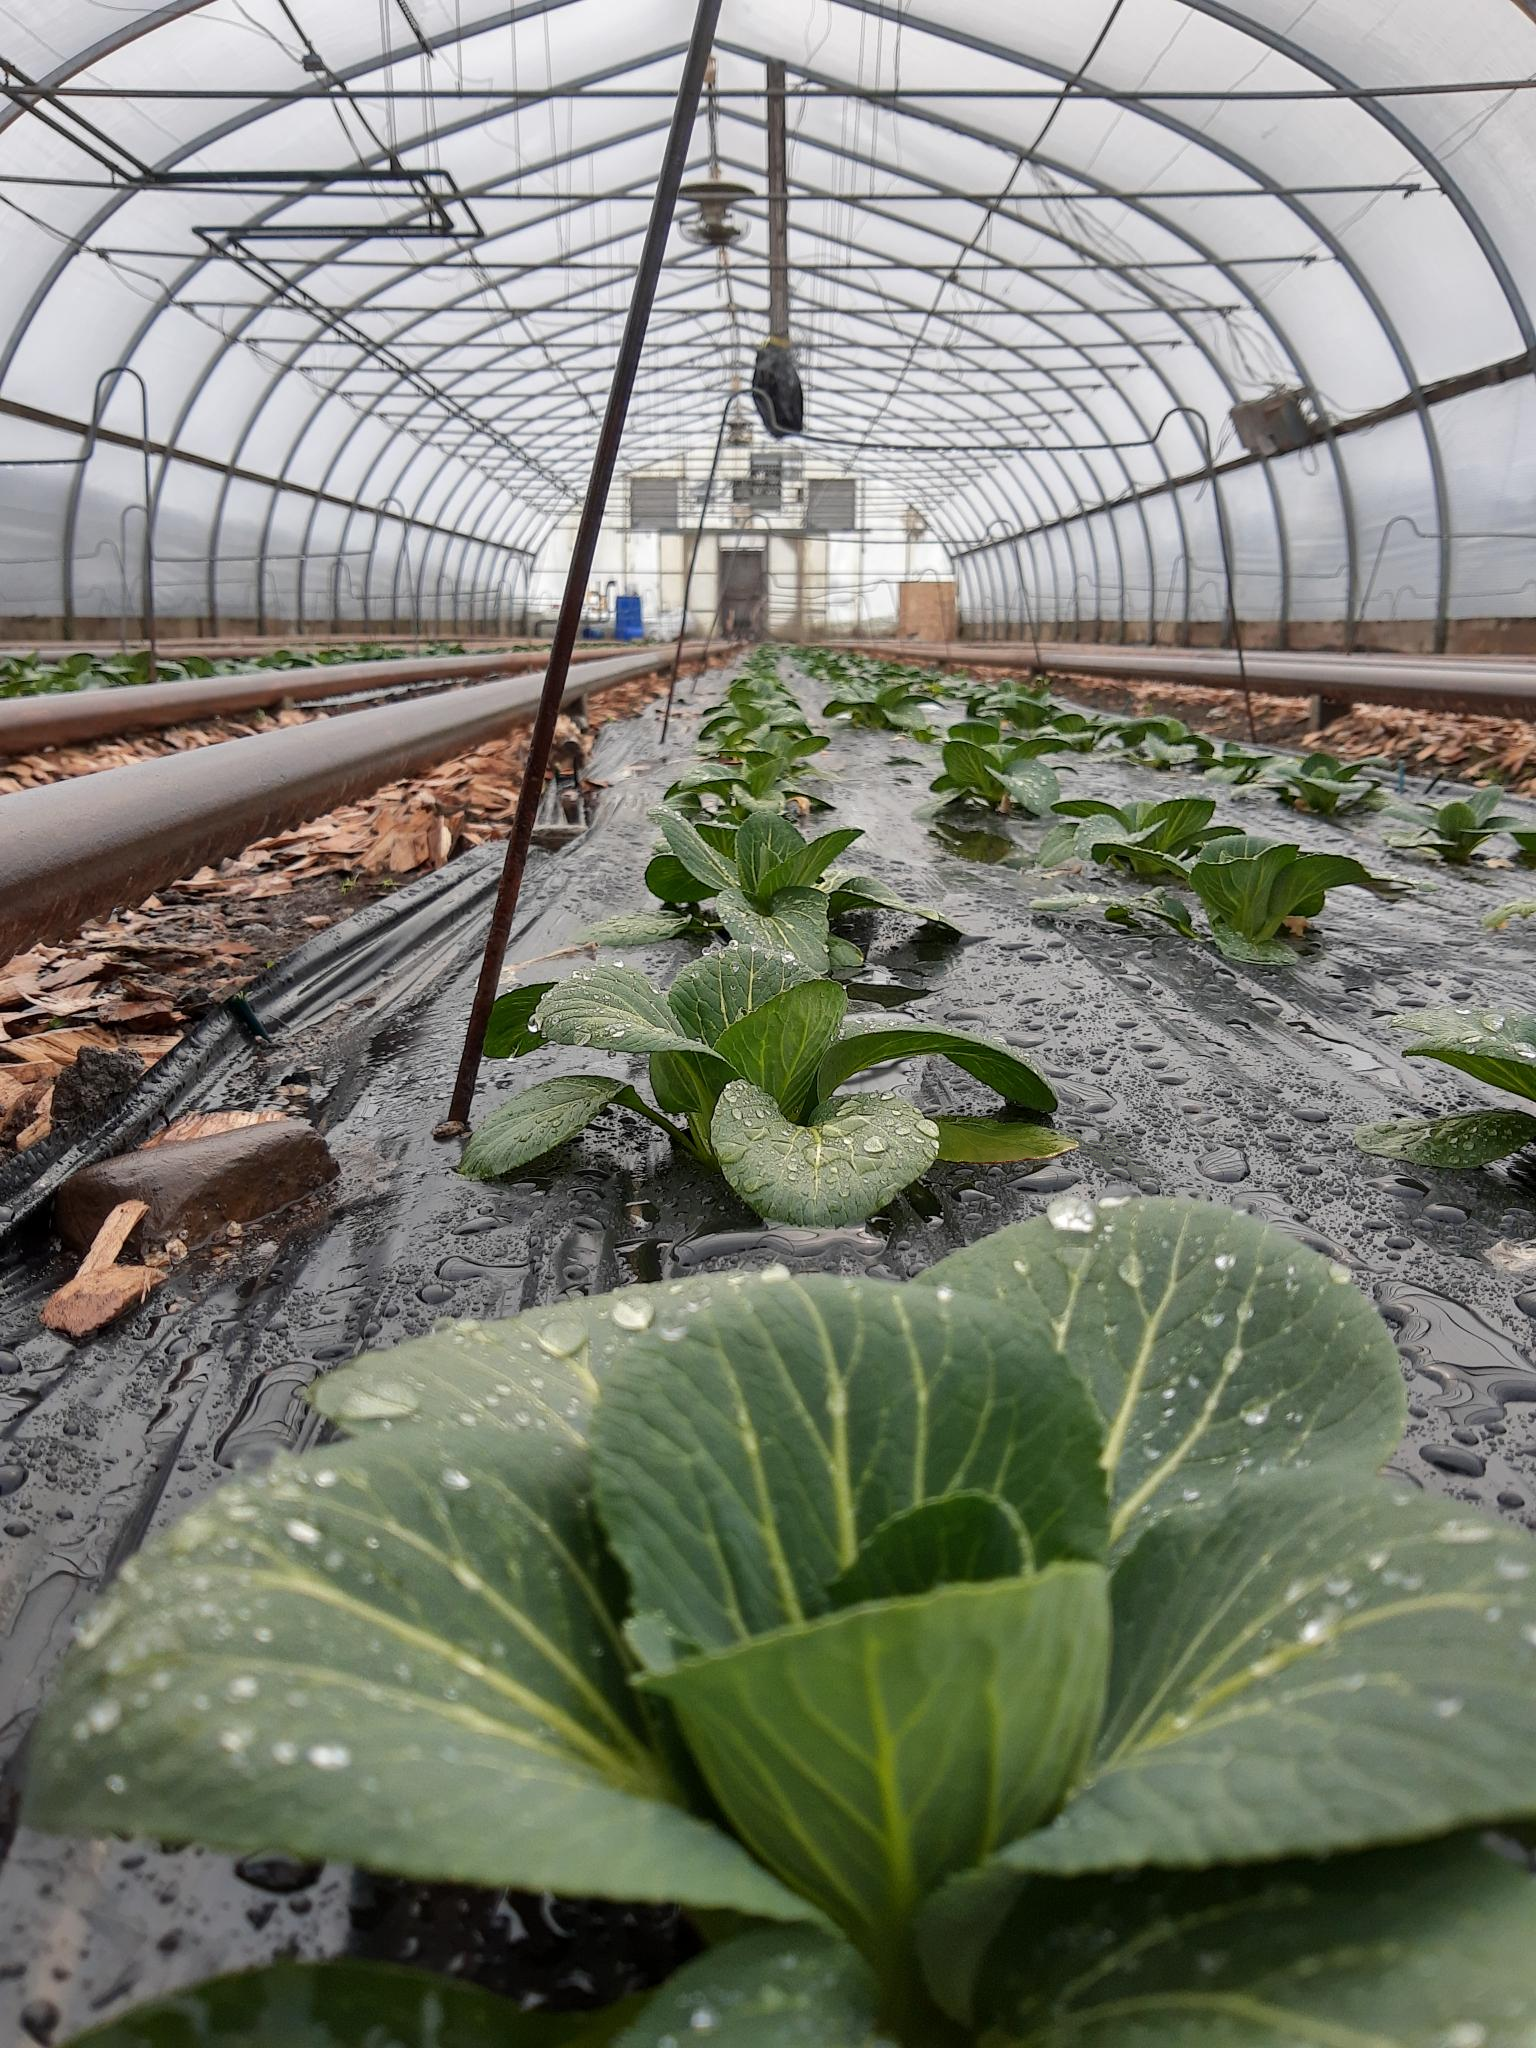 A photo of the vegetables we grew in 2021 in our high tunnel. Photo credit: Lukas Greene